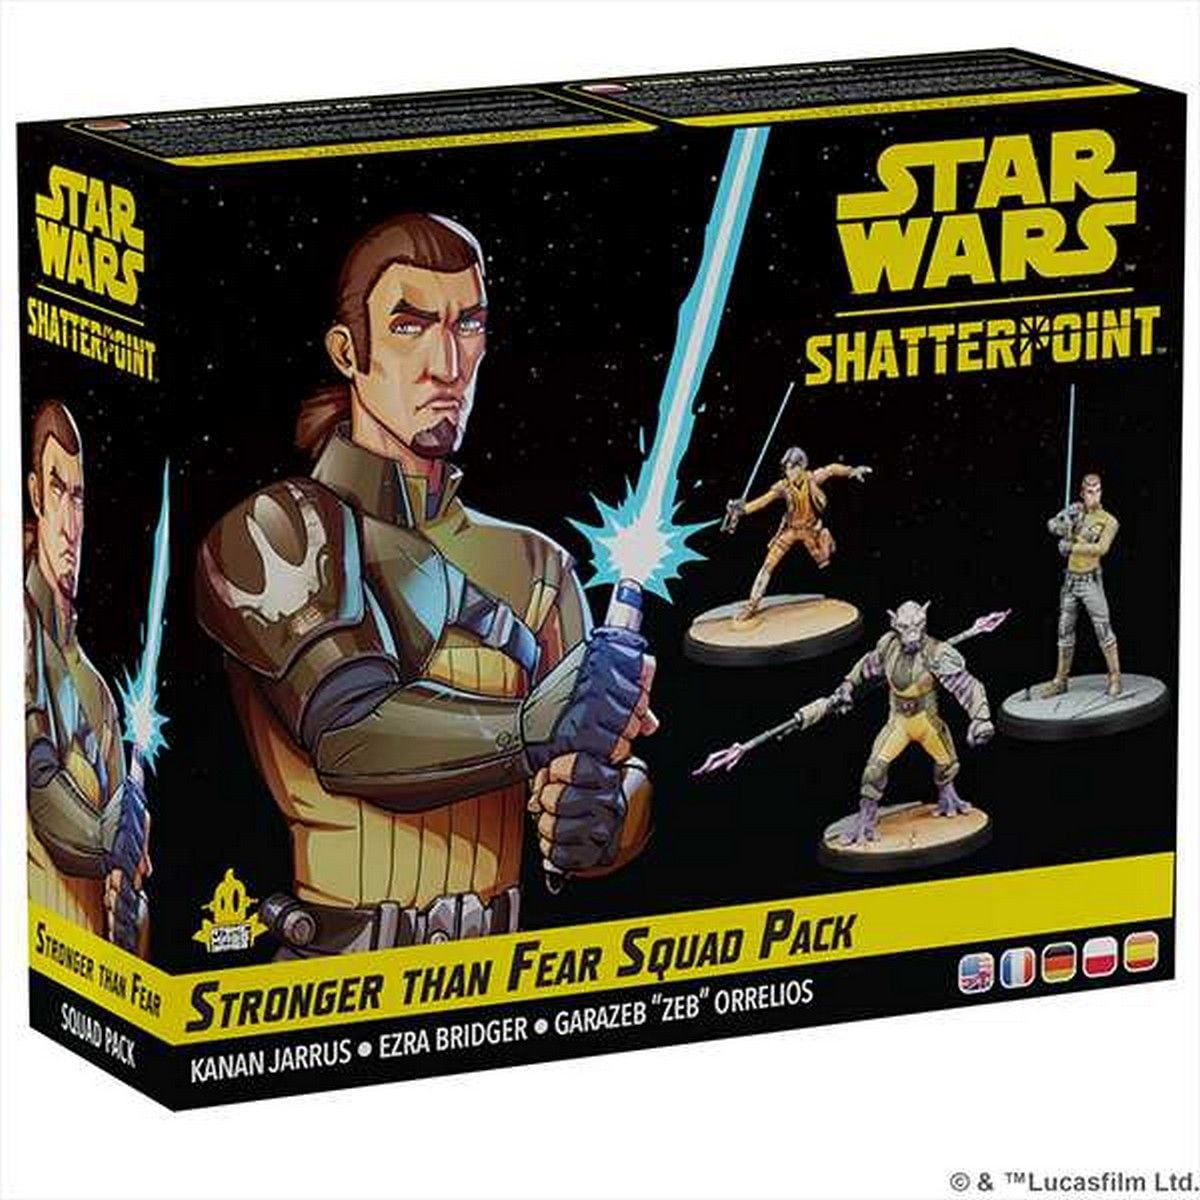 Star Wars: Shatterpoint: Stronger Than Fear Squad Pack